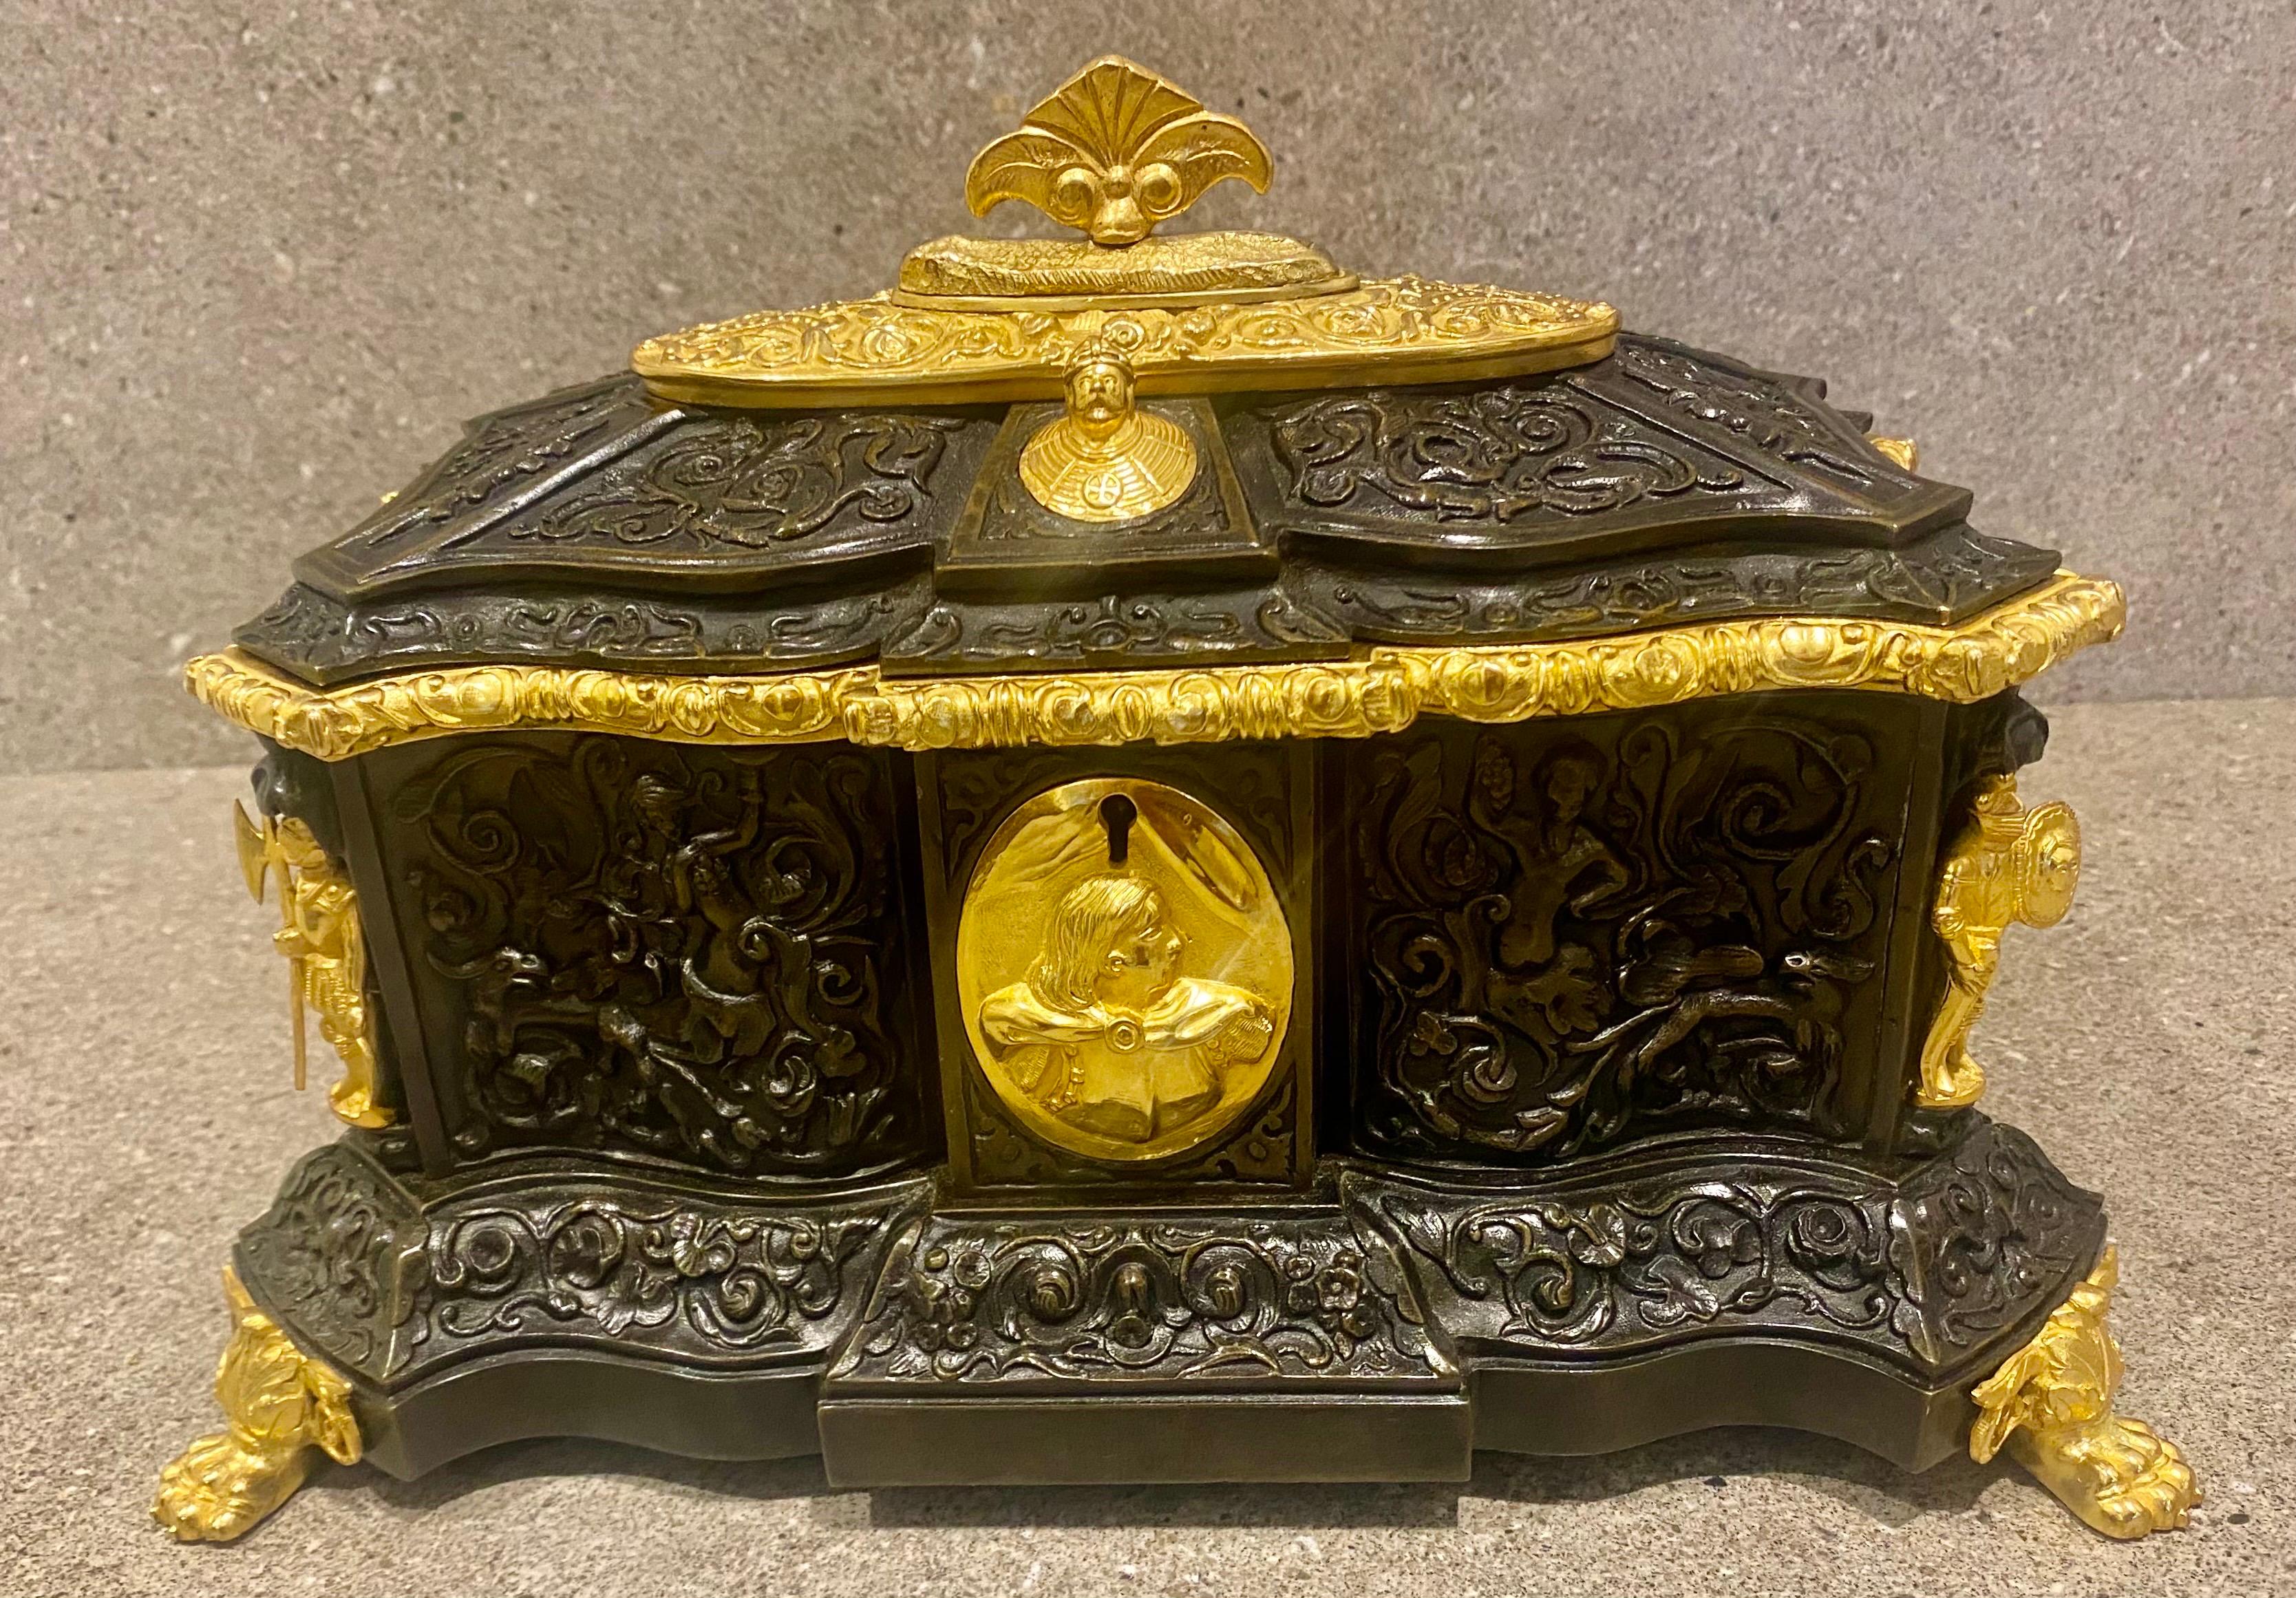  This large heavily cast bronze Jewelry box was made in France in the mid 19th century and is made in the form of a medieval coffer.
It is superbly detailed with flowers Leaves Cherubs and decorative strapwork cast with very deep relief carving to